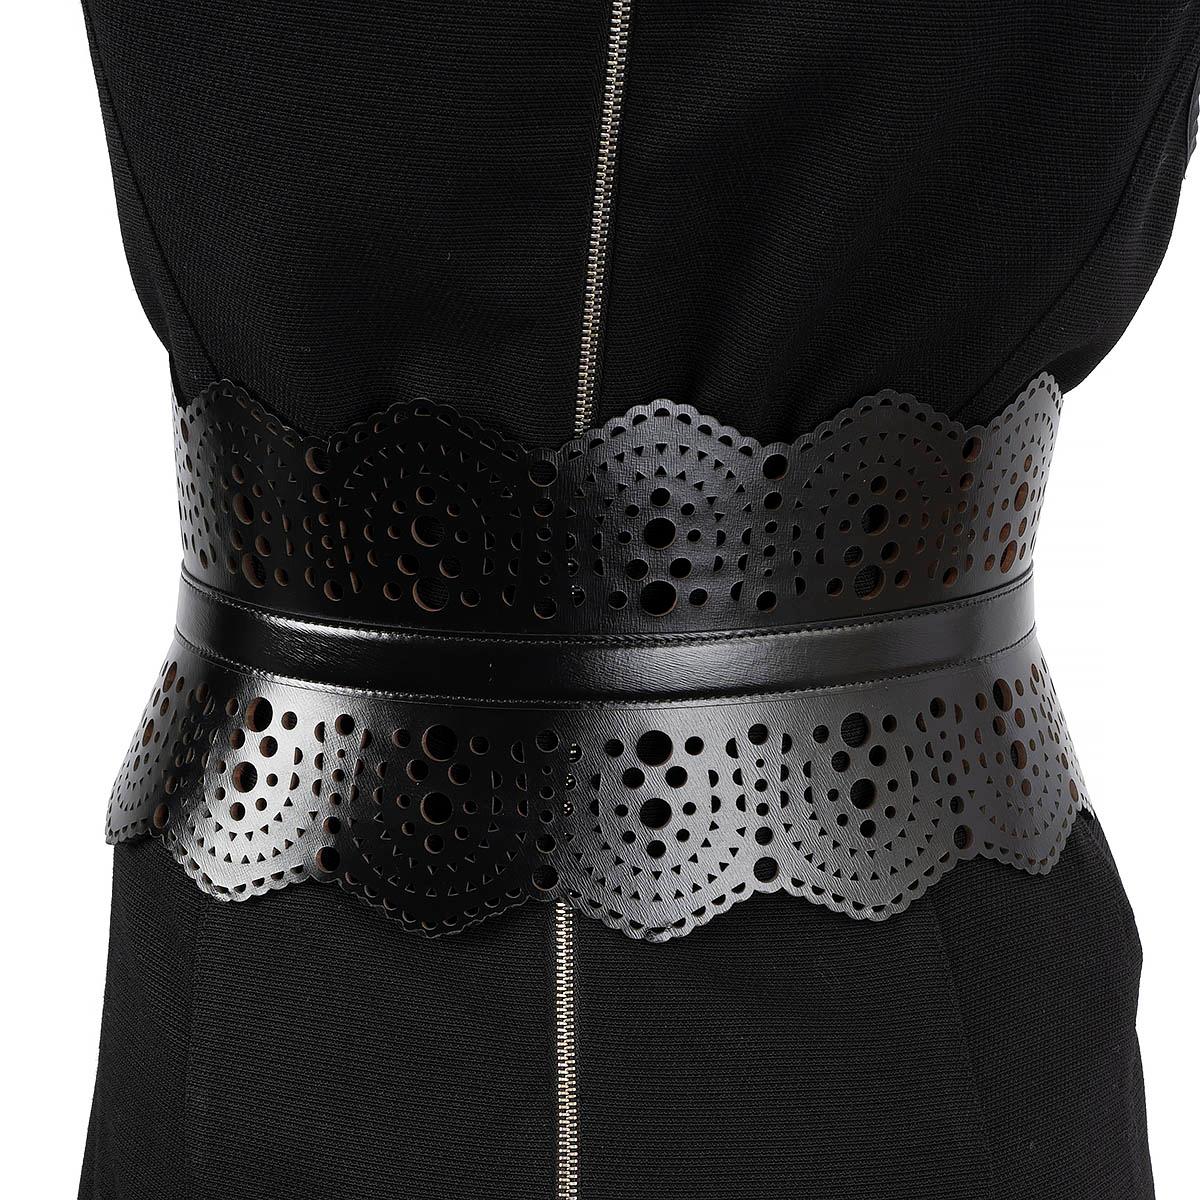 ALAIA black perforated leather CORSET 120 WAIST Belt 70 In New Condition For Sale In Zürich, CH